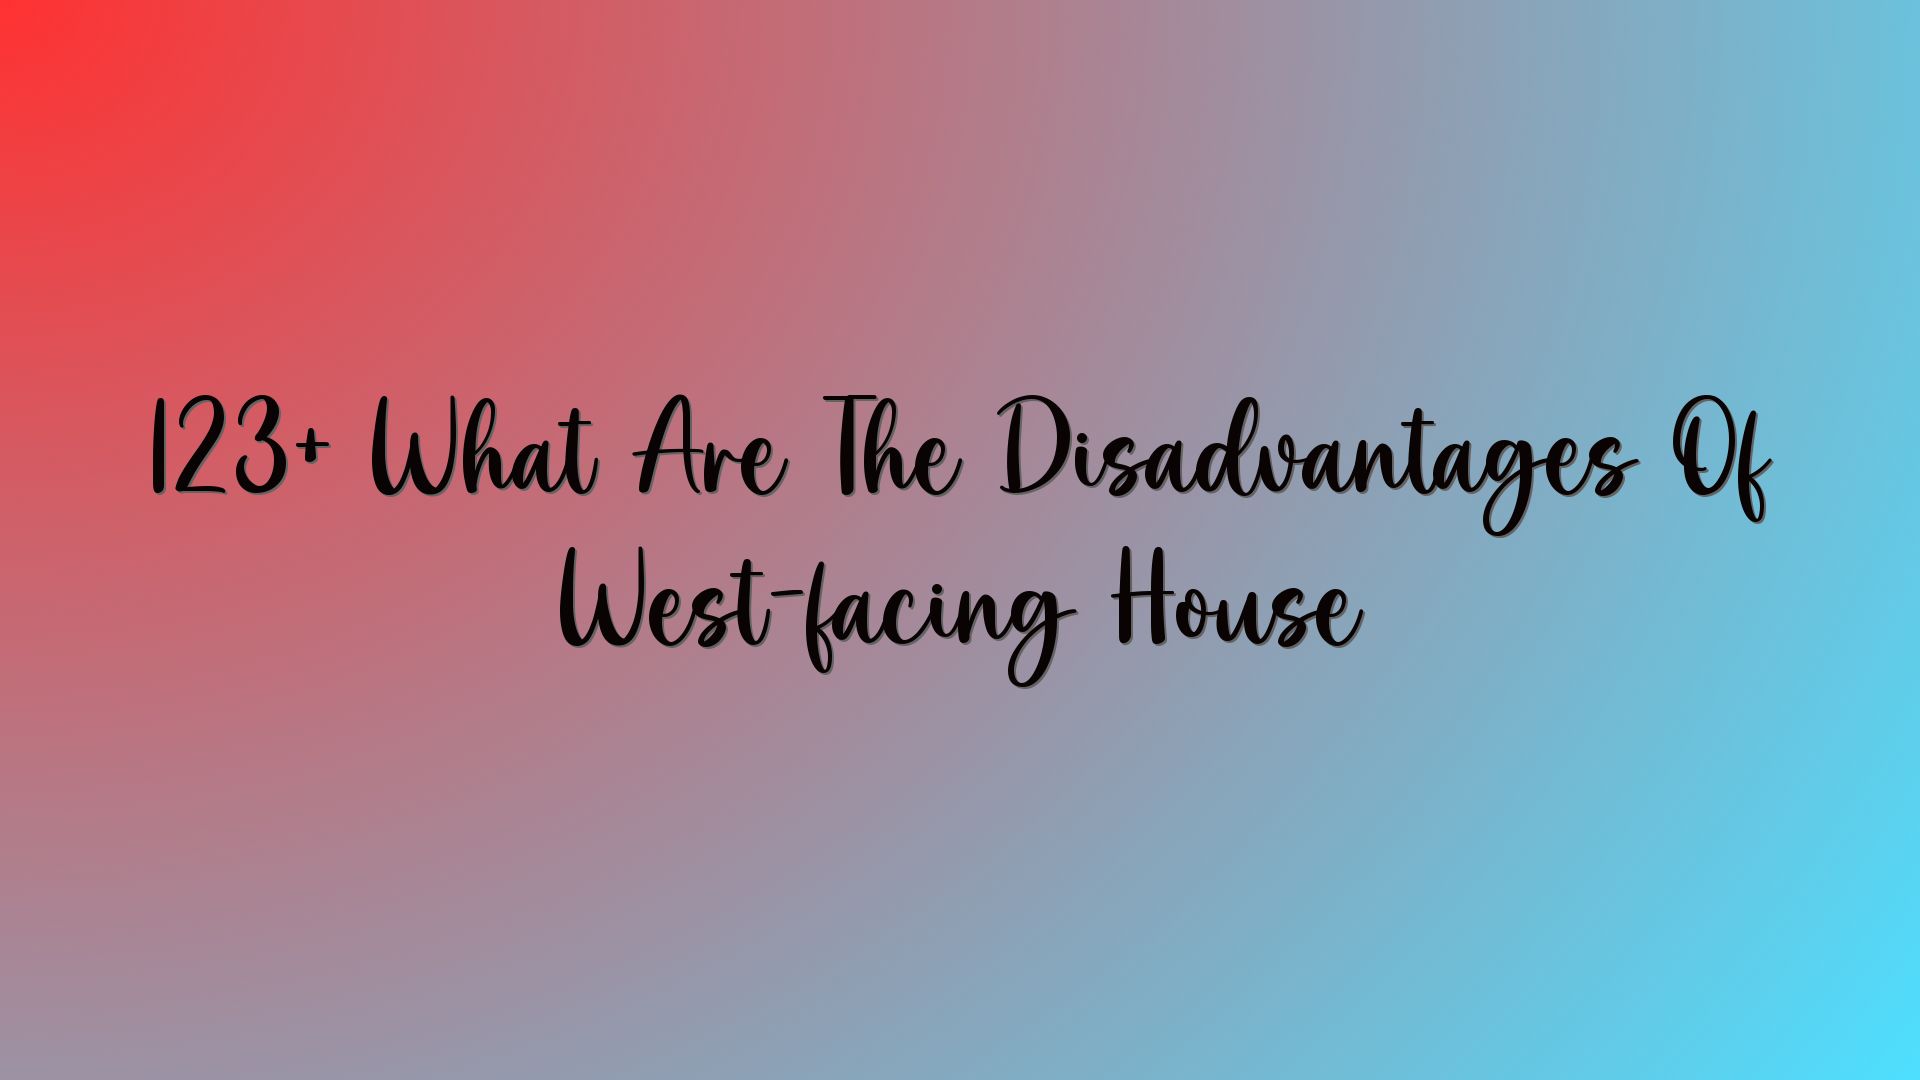 123+ What Are The Disadvantages Of West-facing House